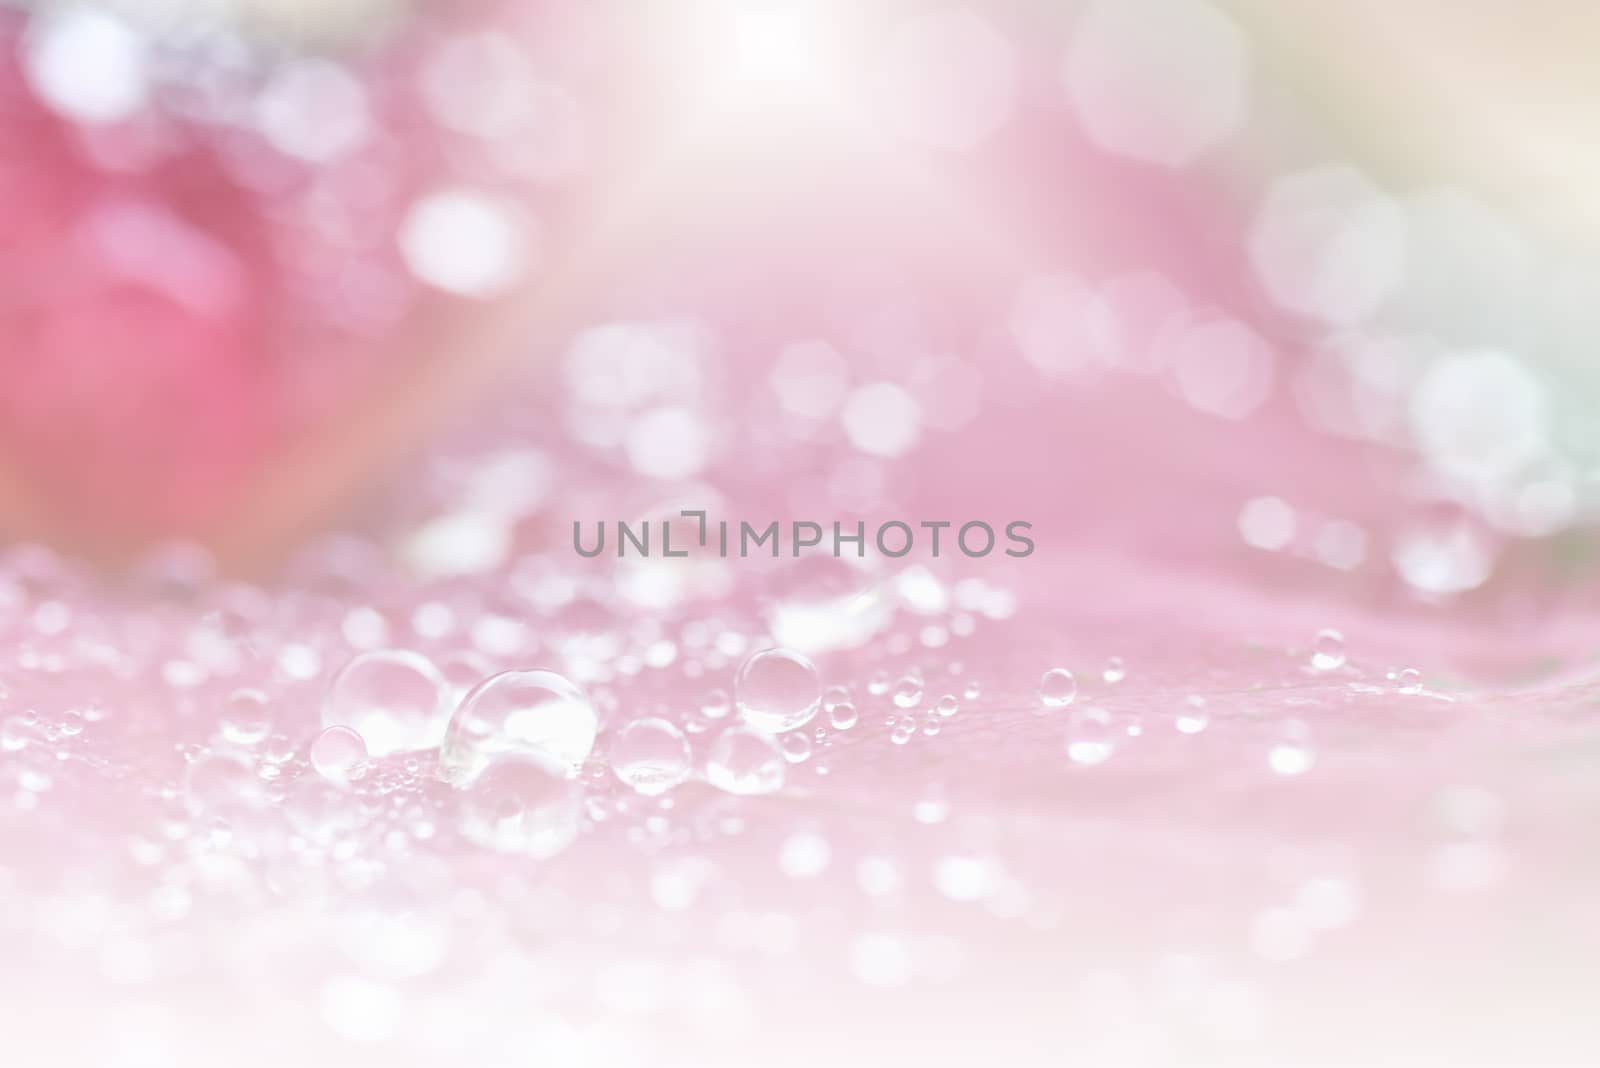 Abstract transparent drop of dew water sparkles in the rays of bright light close-up macro. Water droplets on beautiful natural leaves in blurred style for the background. Soft Selected focus